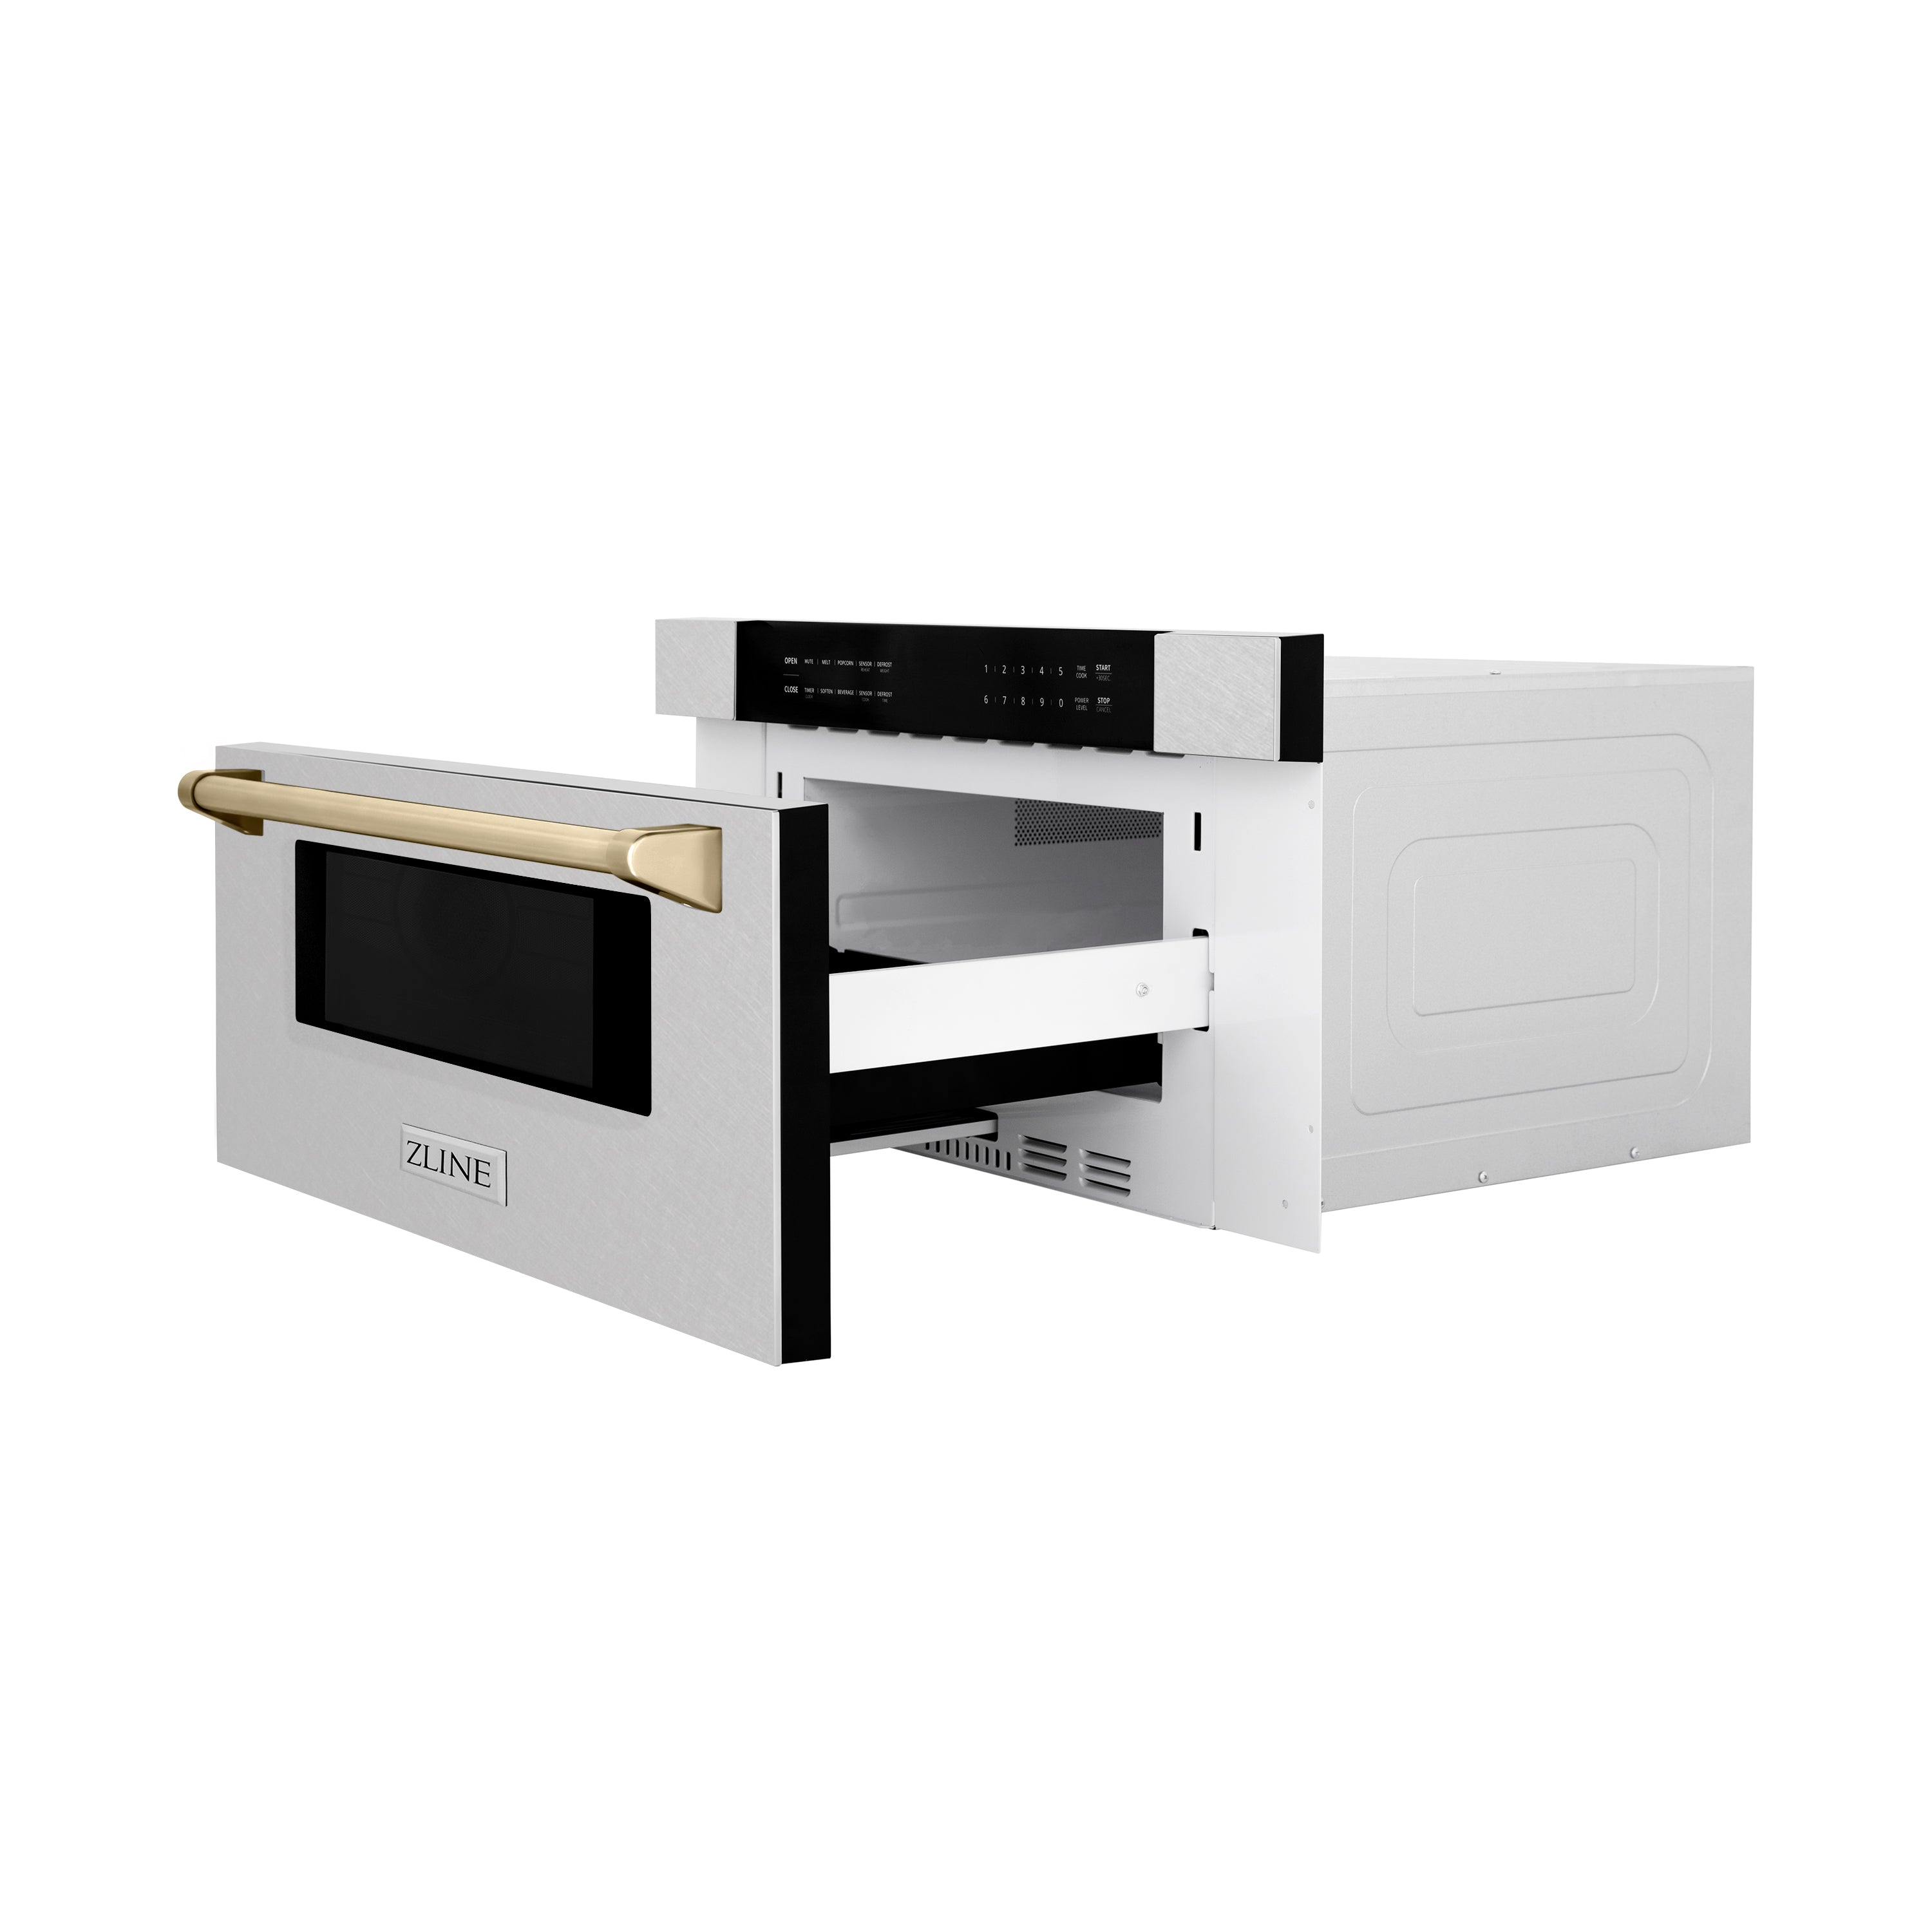 ZLINE Autograph Edition 30 in. 1.2 cu. ft. Built-In Microwave Drawer in Fingerprint Resistant Stainless Steel with Gold Accents (MWDZ-30-SS-G) Side View Drawer Open